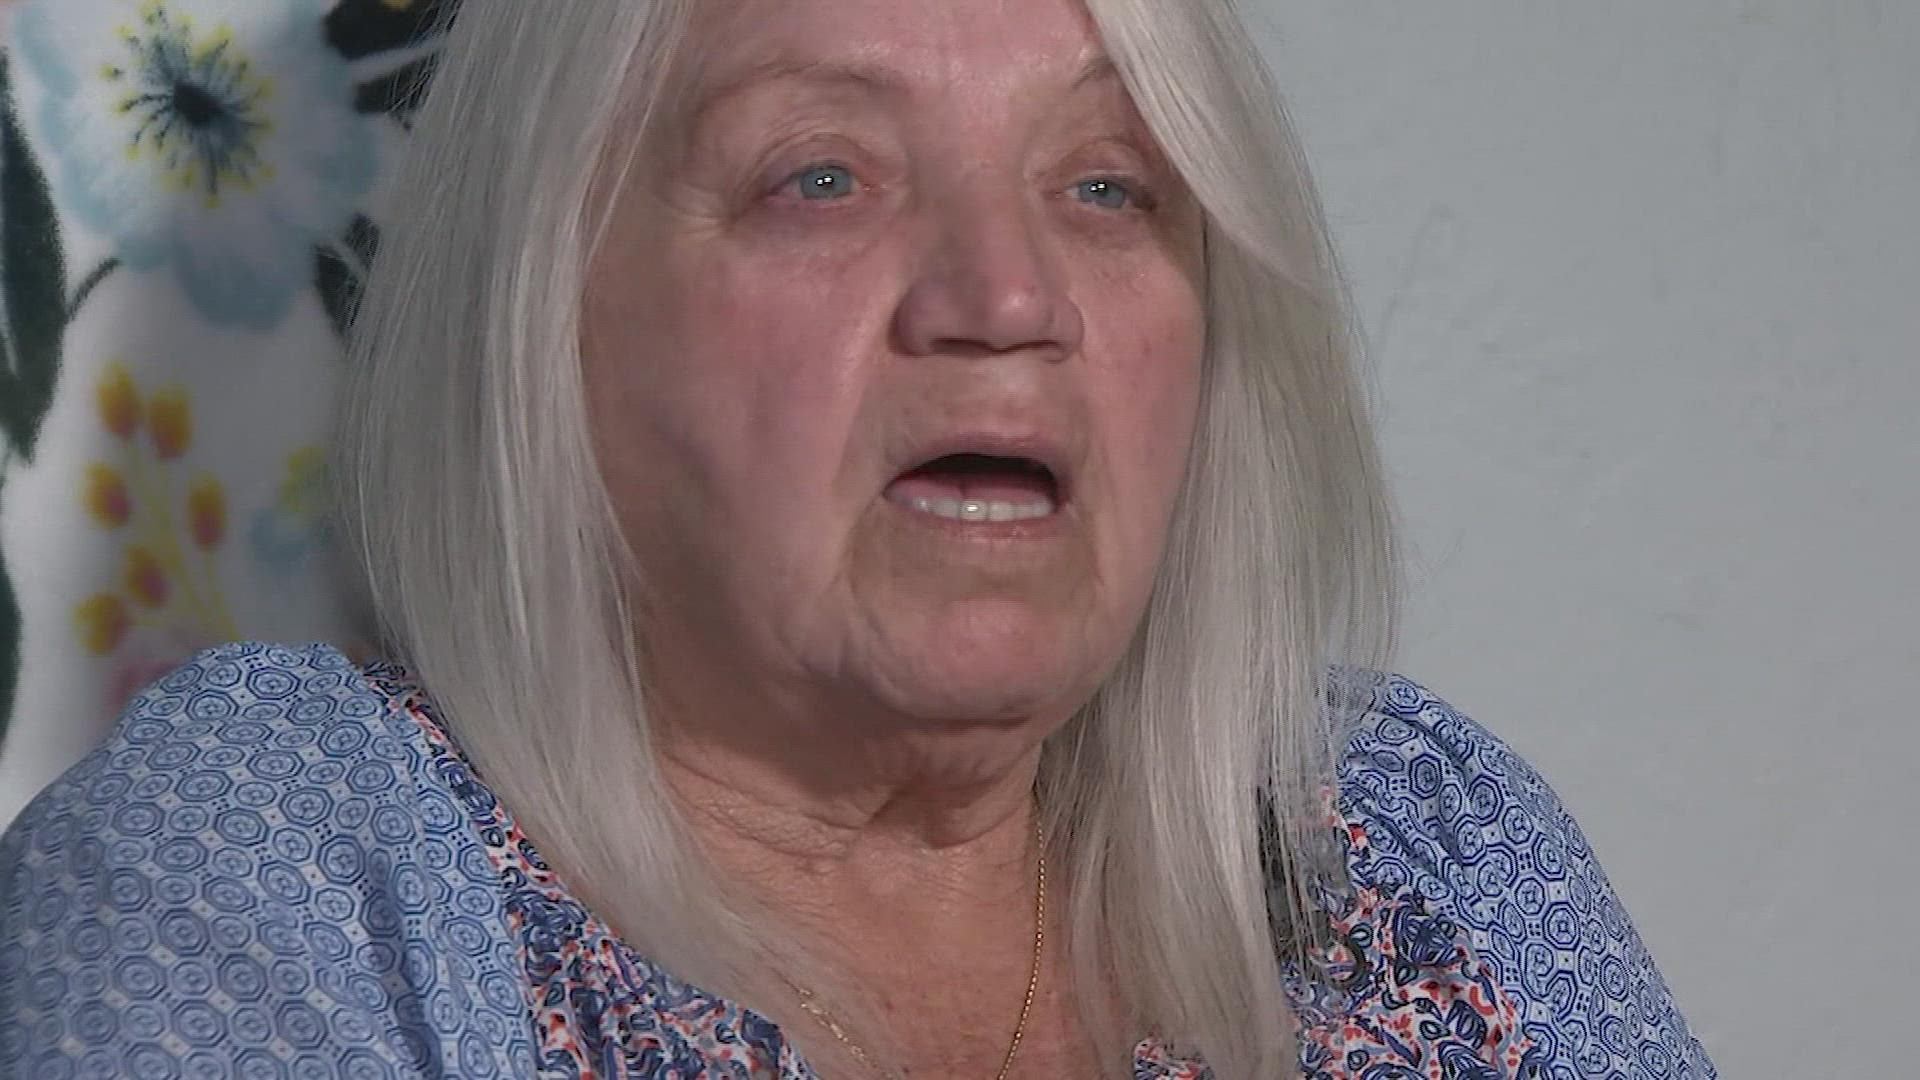 A 70-year-old mom spent a night in jail after refusing to leave her daughter’s side at a hospital.